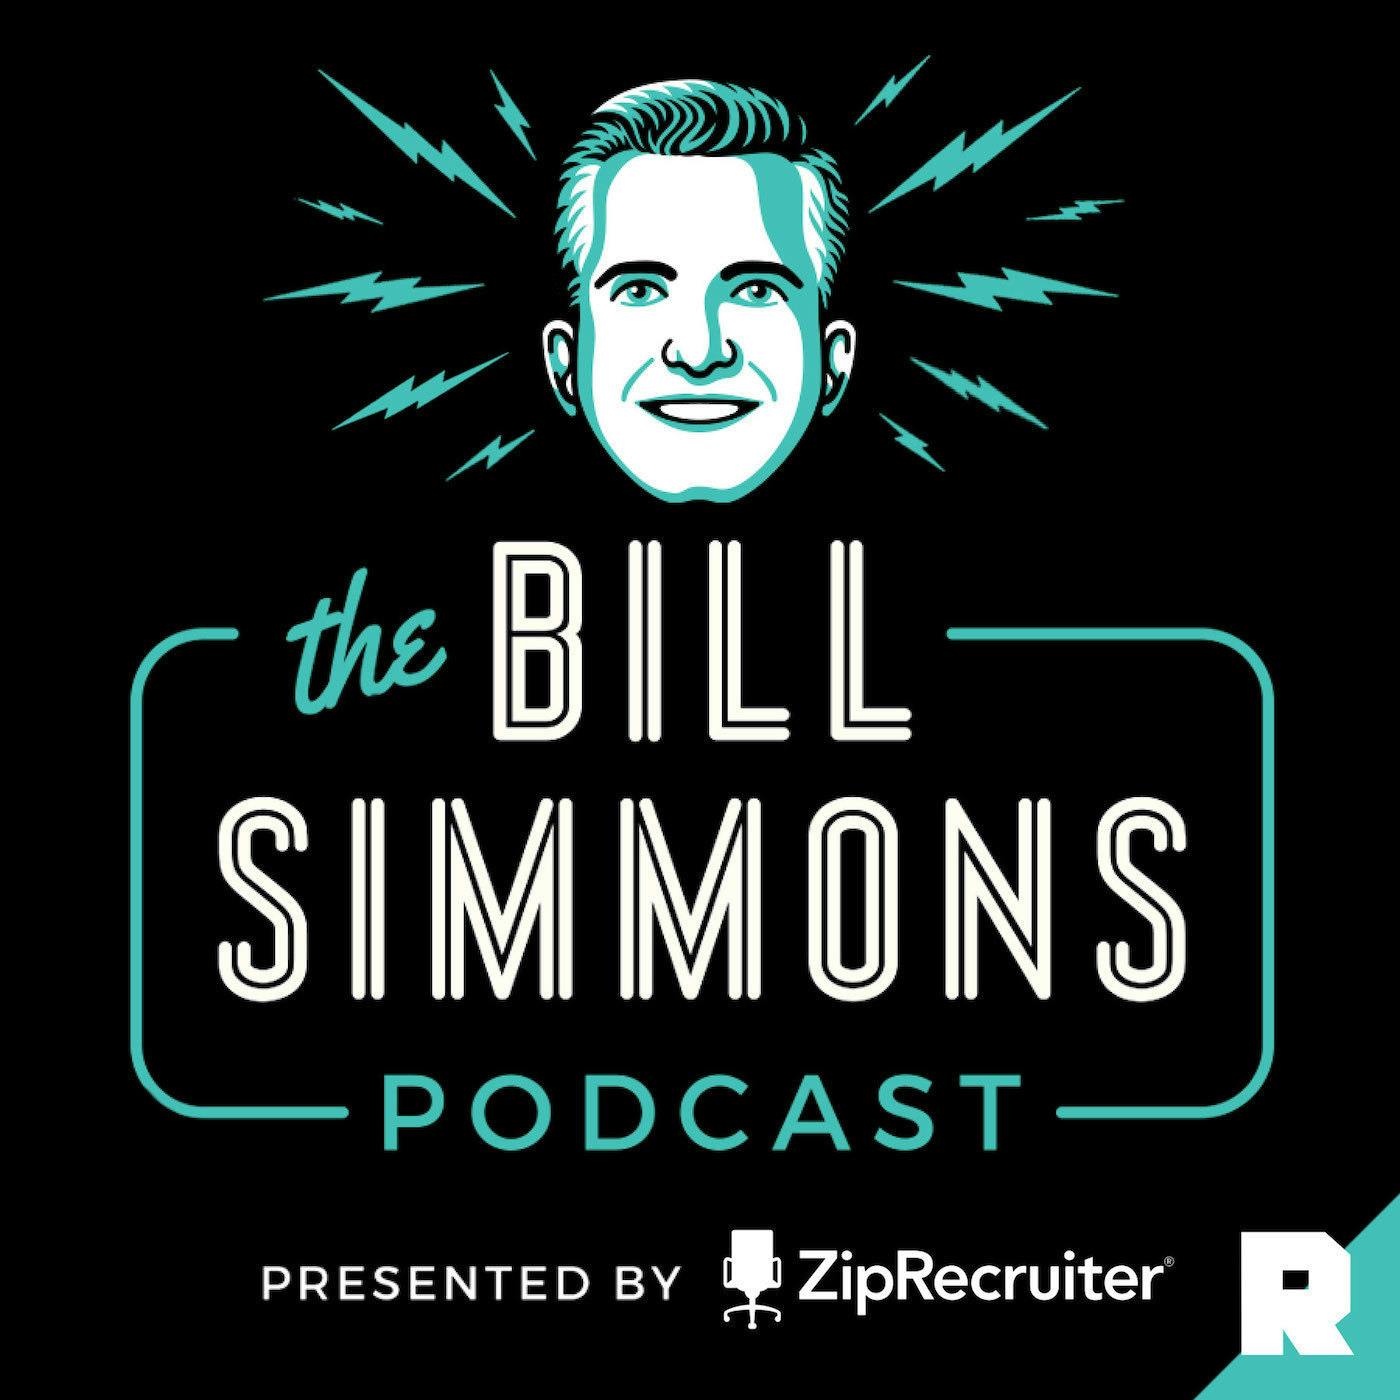 New York Hoops, Food Trends, ESPN's Future, and Nick Saban With Eddie Huang and Jim Miller | The Bill Simmons Podcast (Ep. 399)